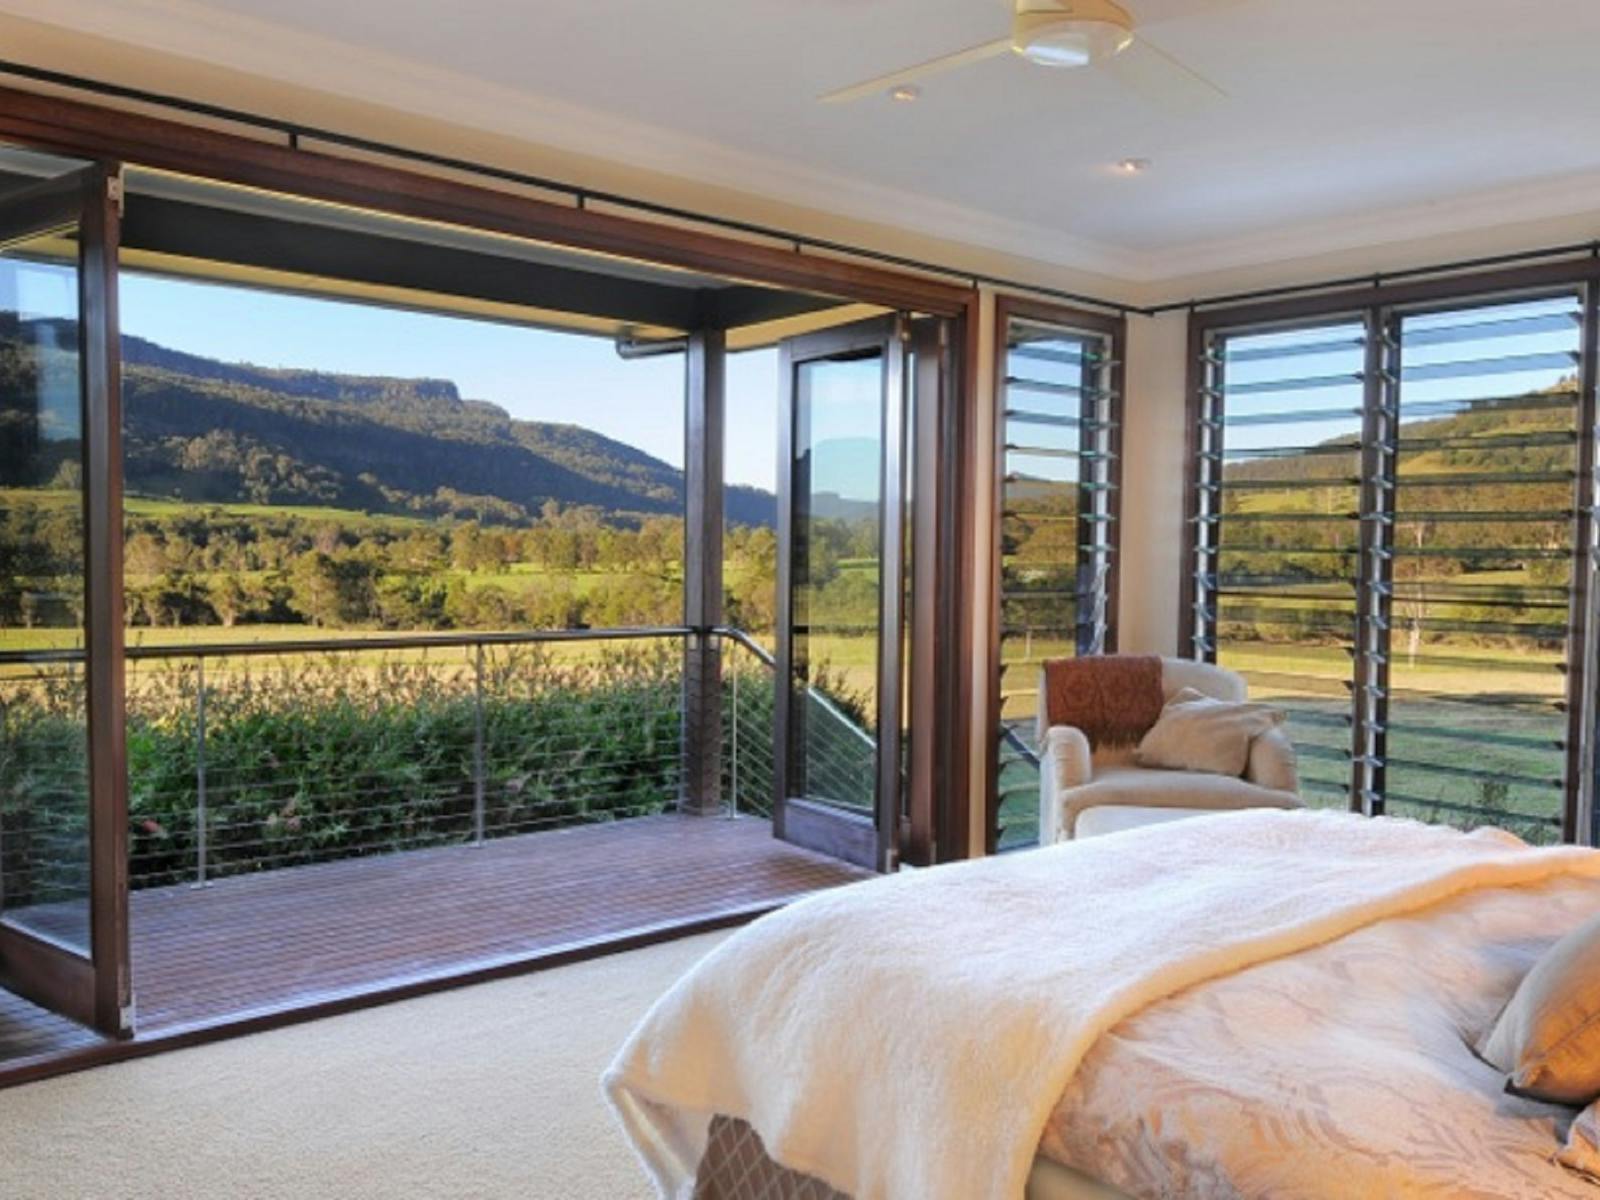 Bedrooms with views